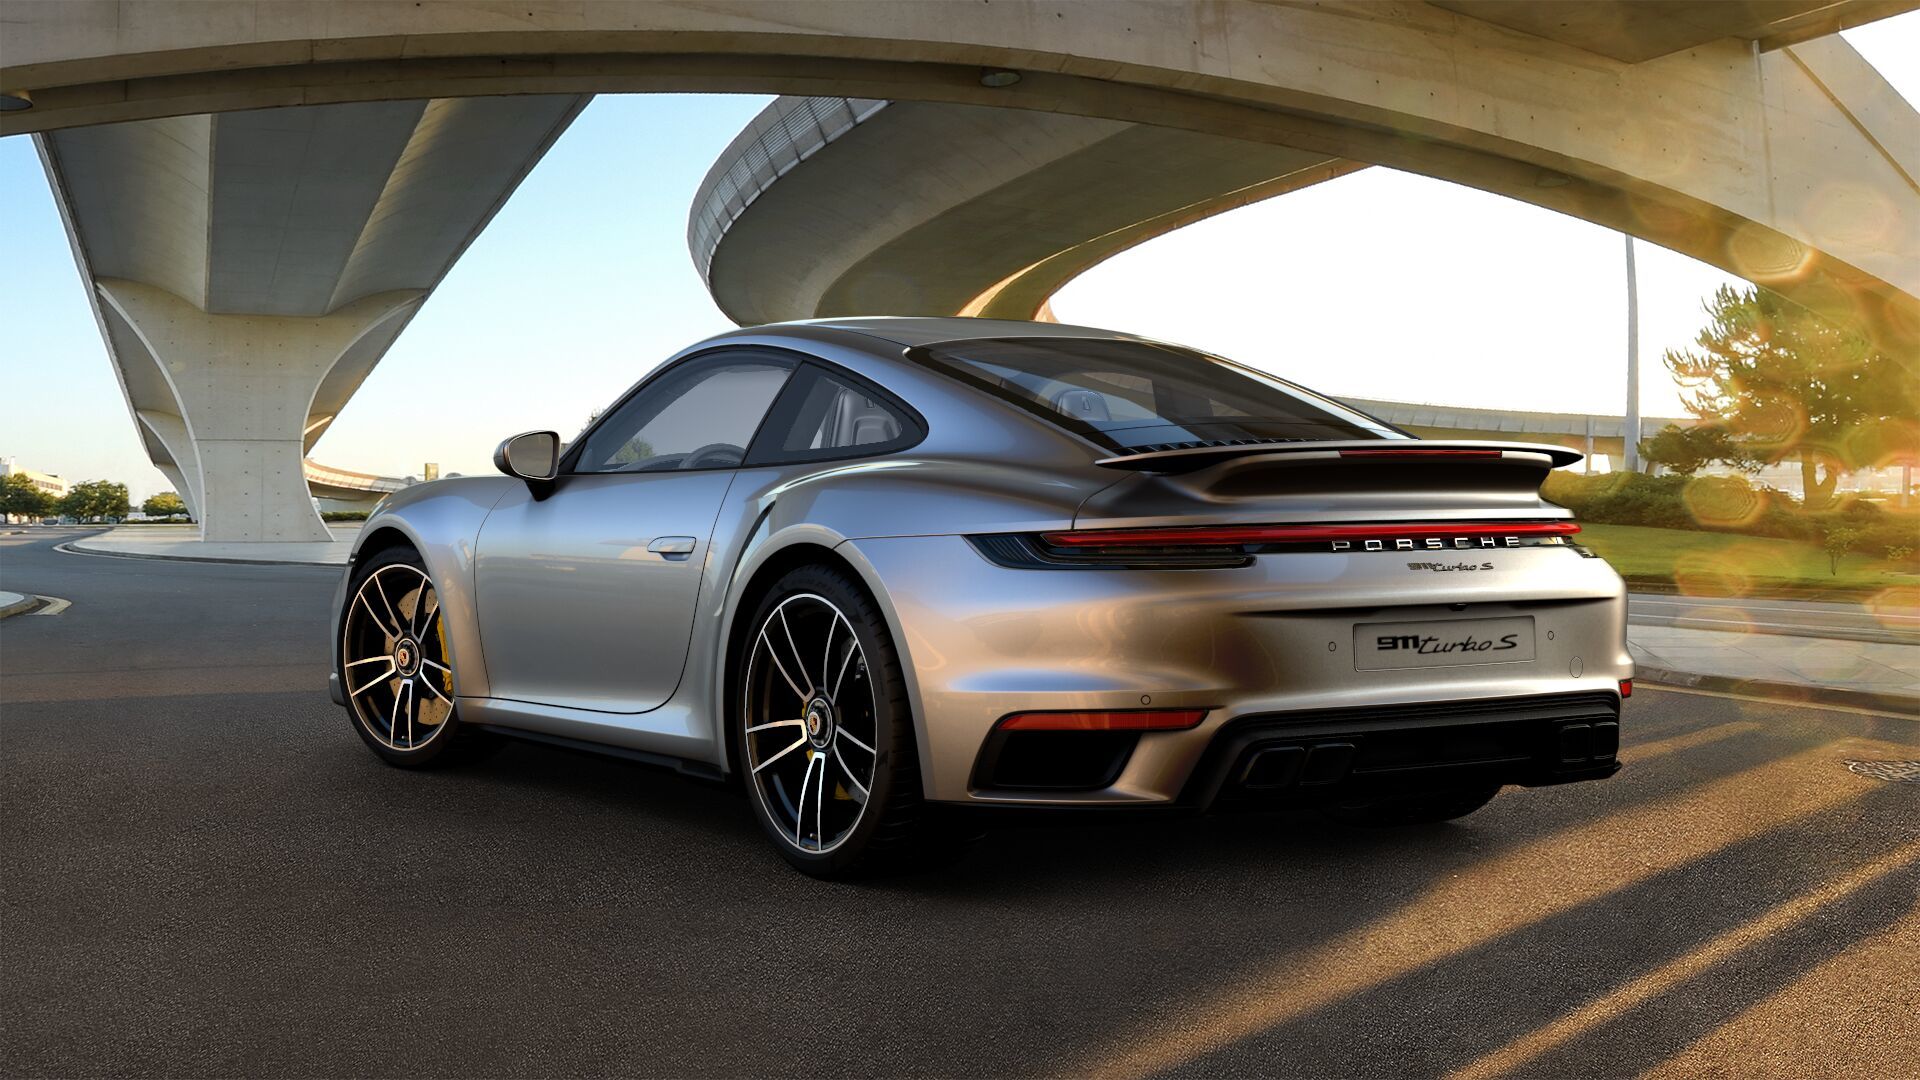 Drive review: 2021 Porsche 911 Turbo S sets a new benchmark for